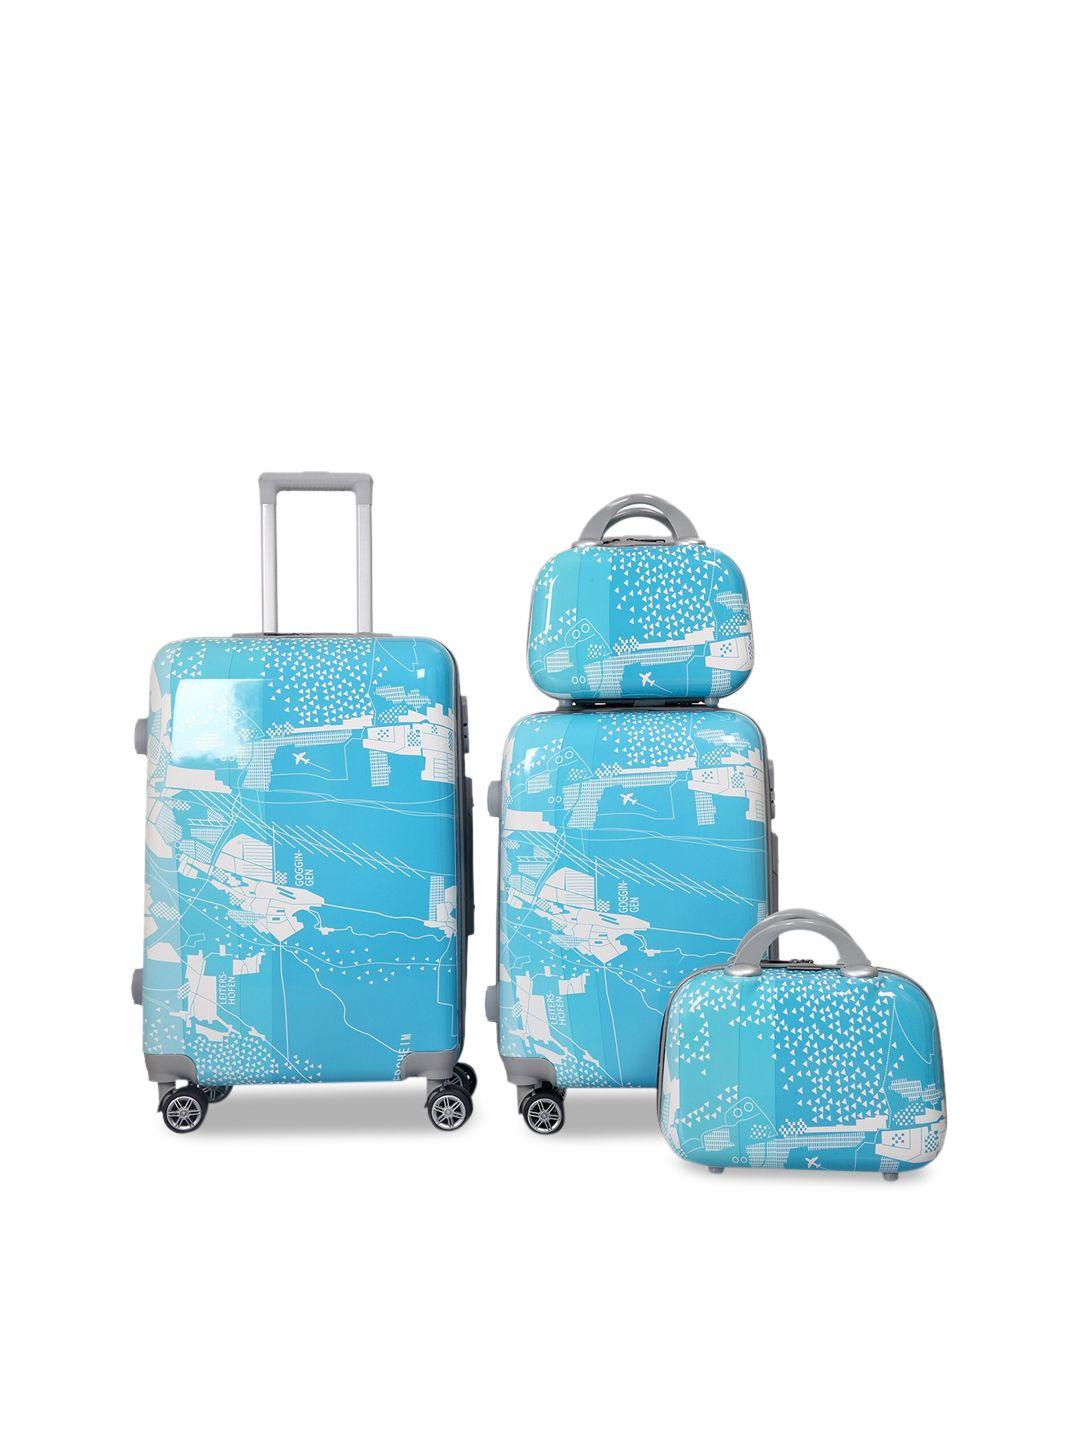 polo class set of 4 hard-sided trolley suitcases & vanity bags